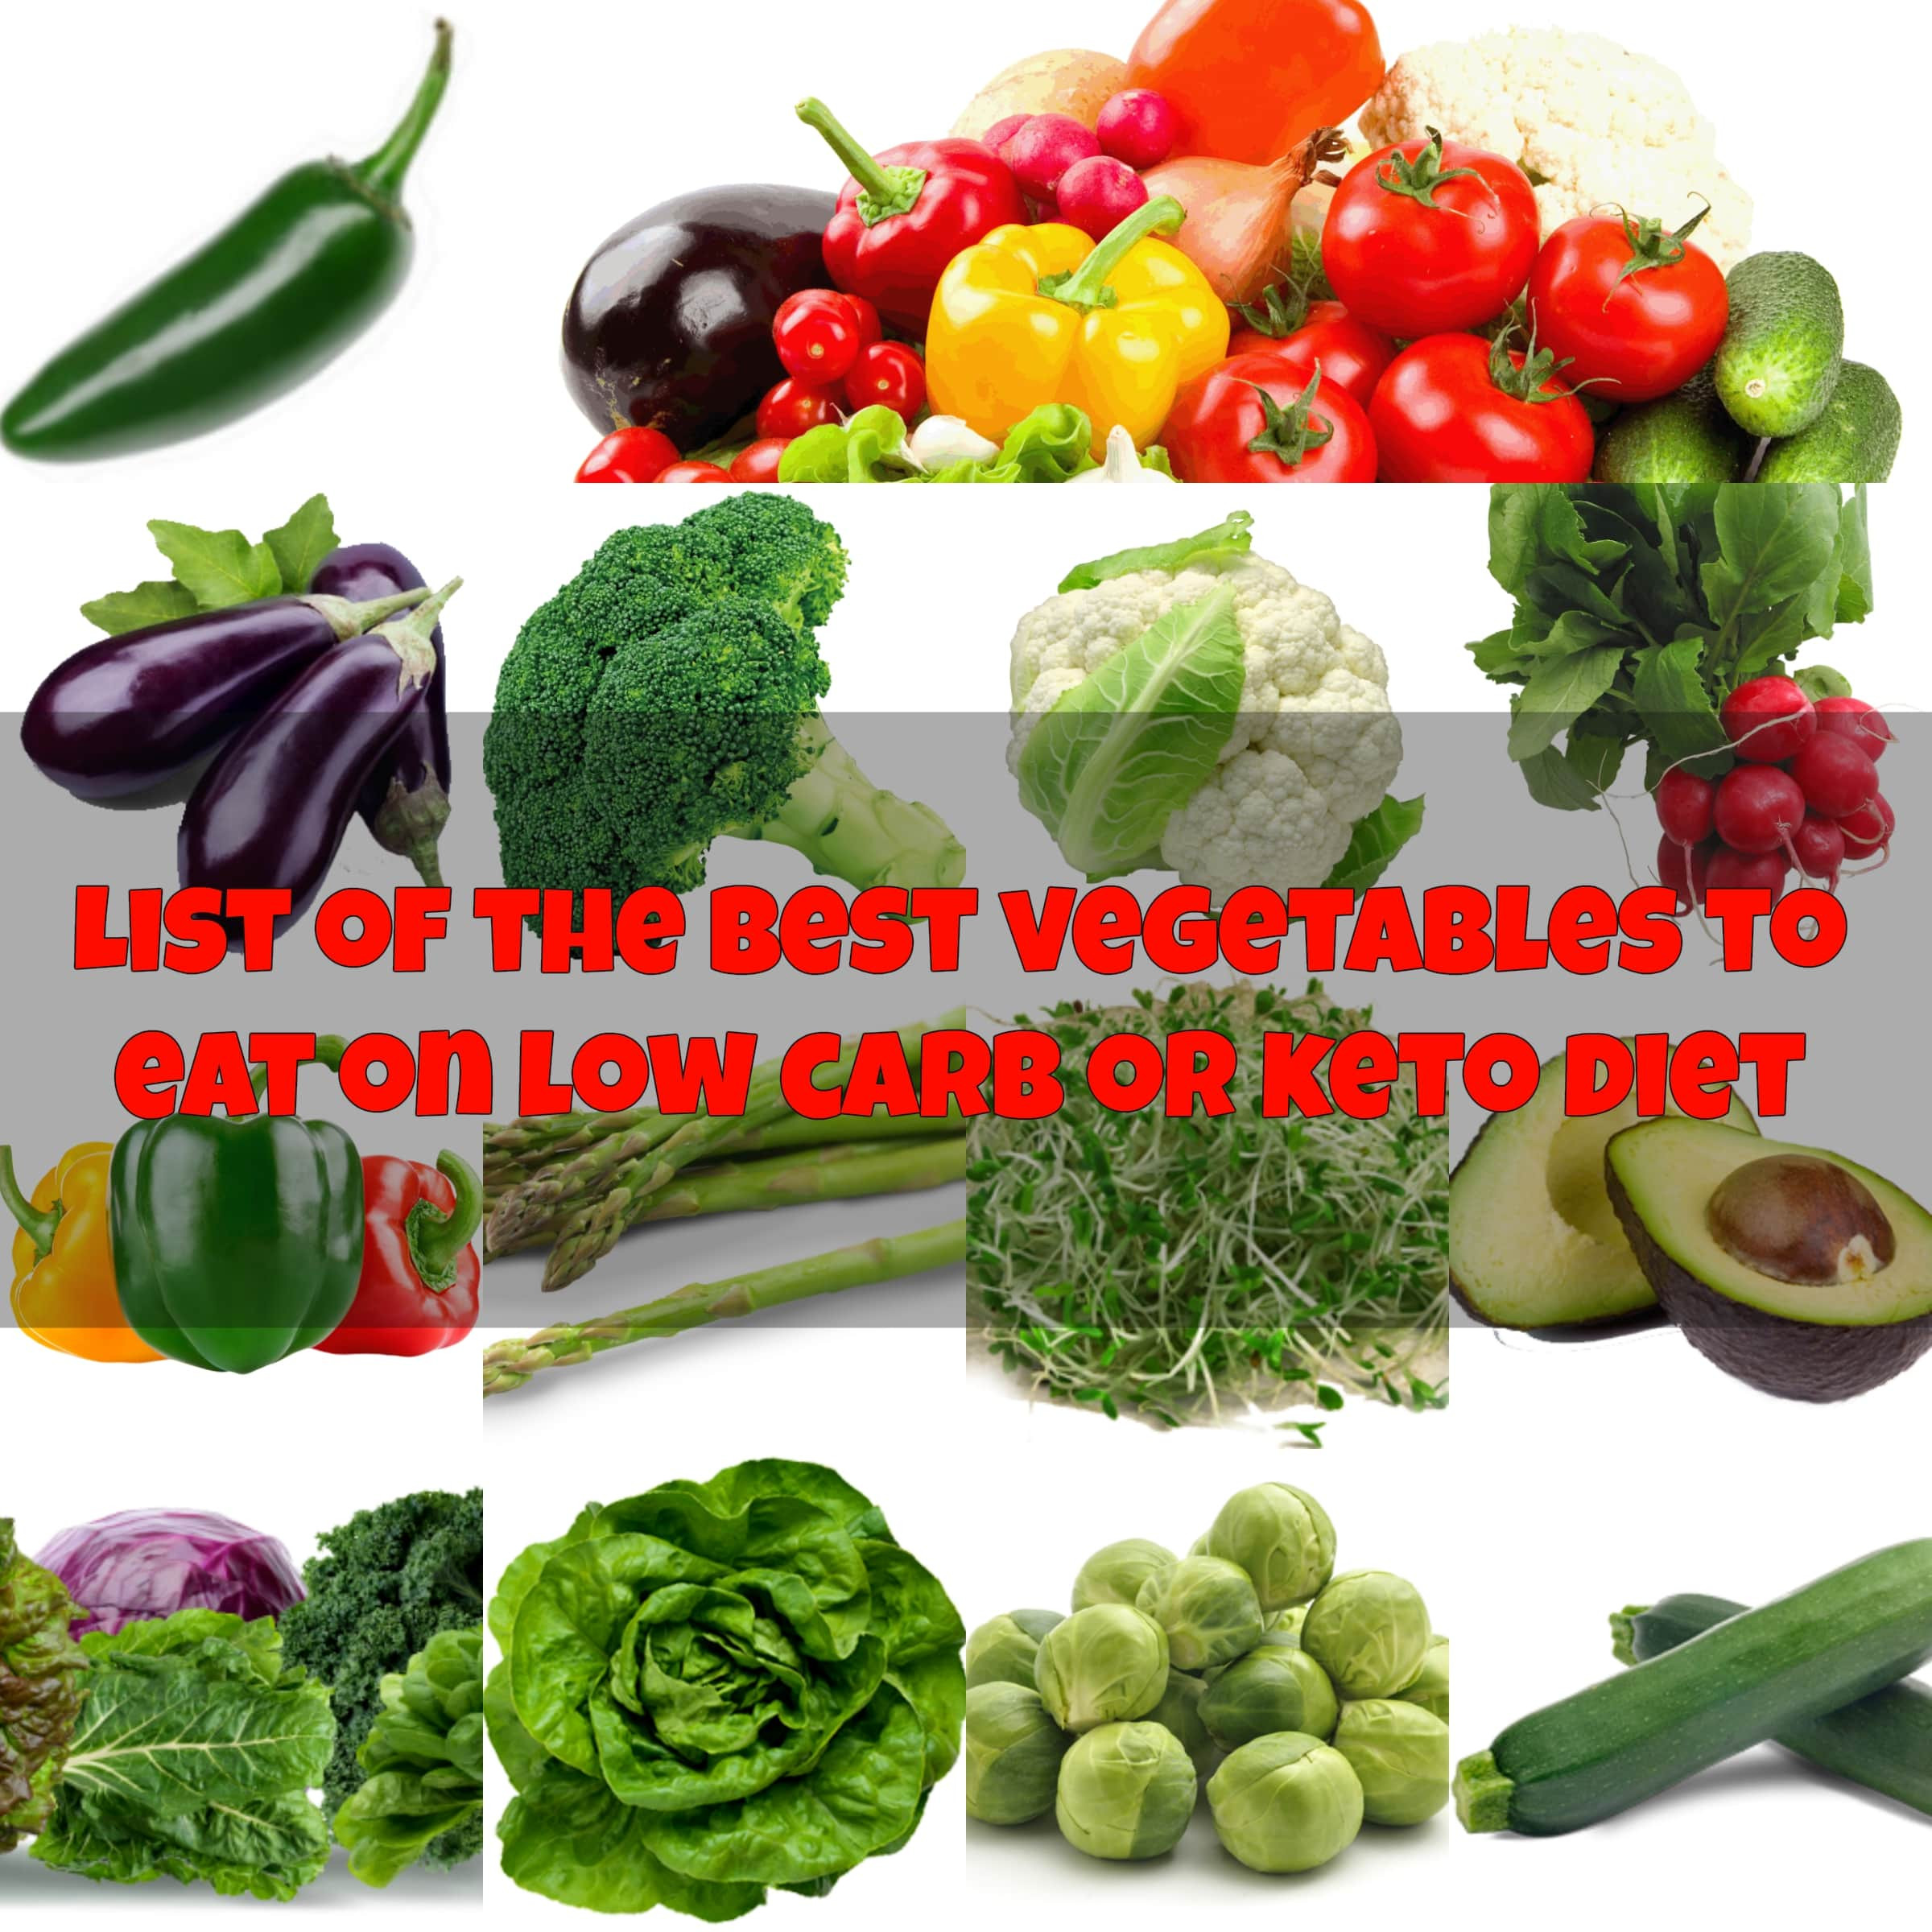 Keto Diet Veggies
 The Best Keto Ve ables List The ultimate Low Carb